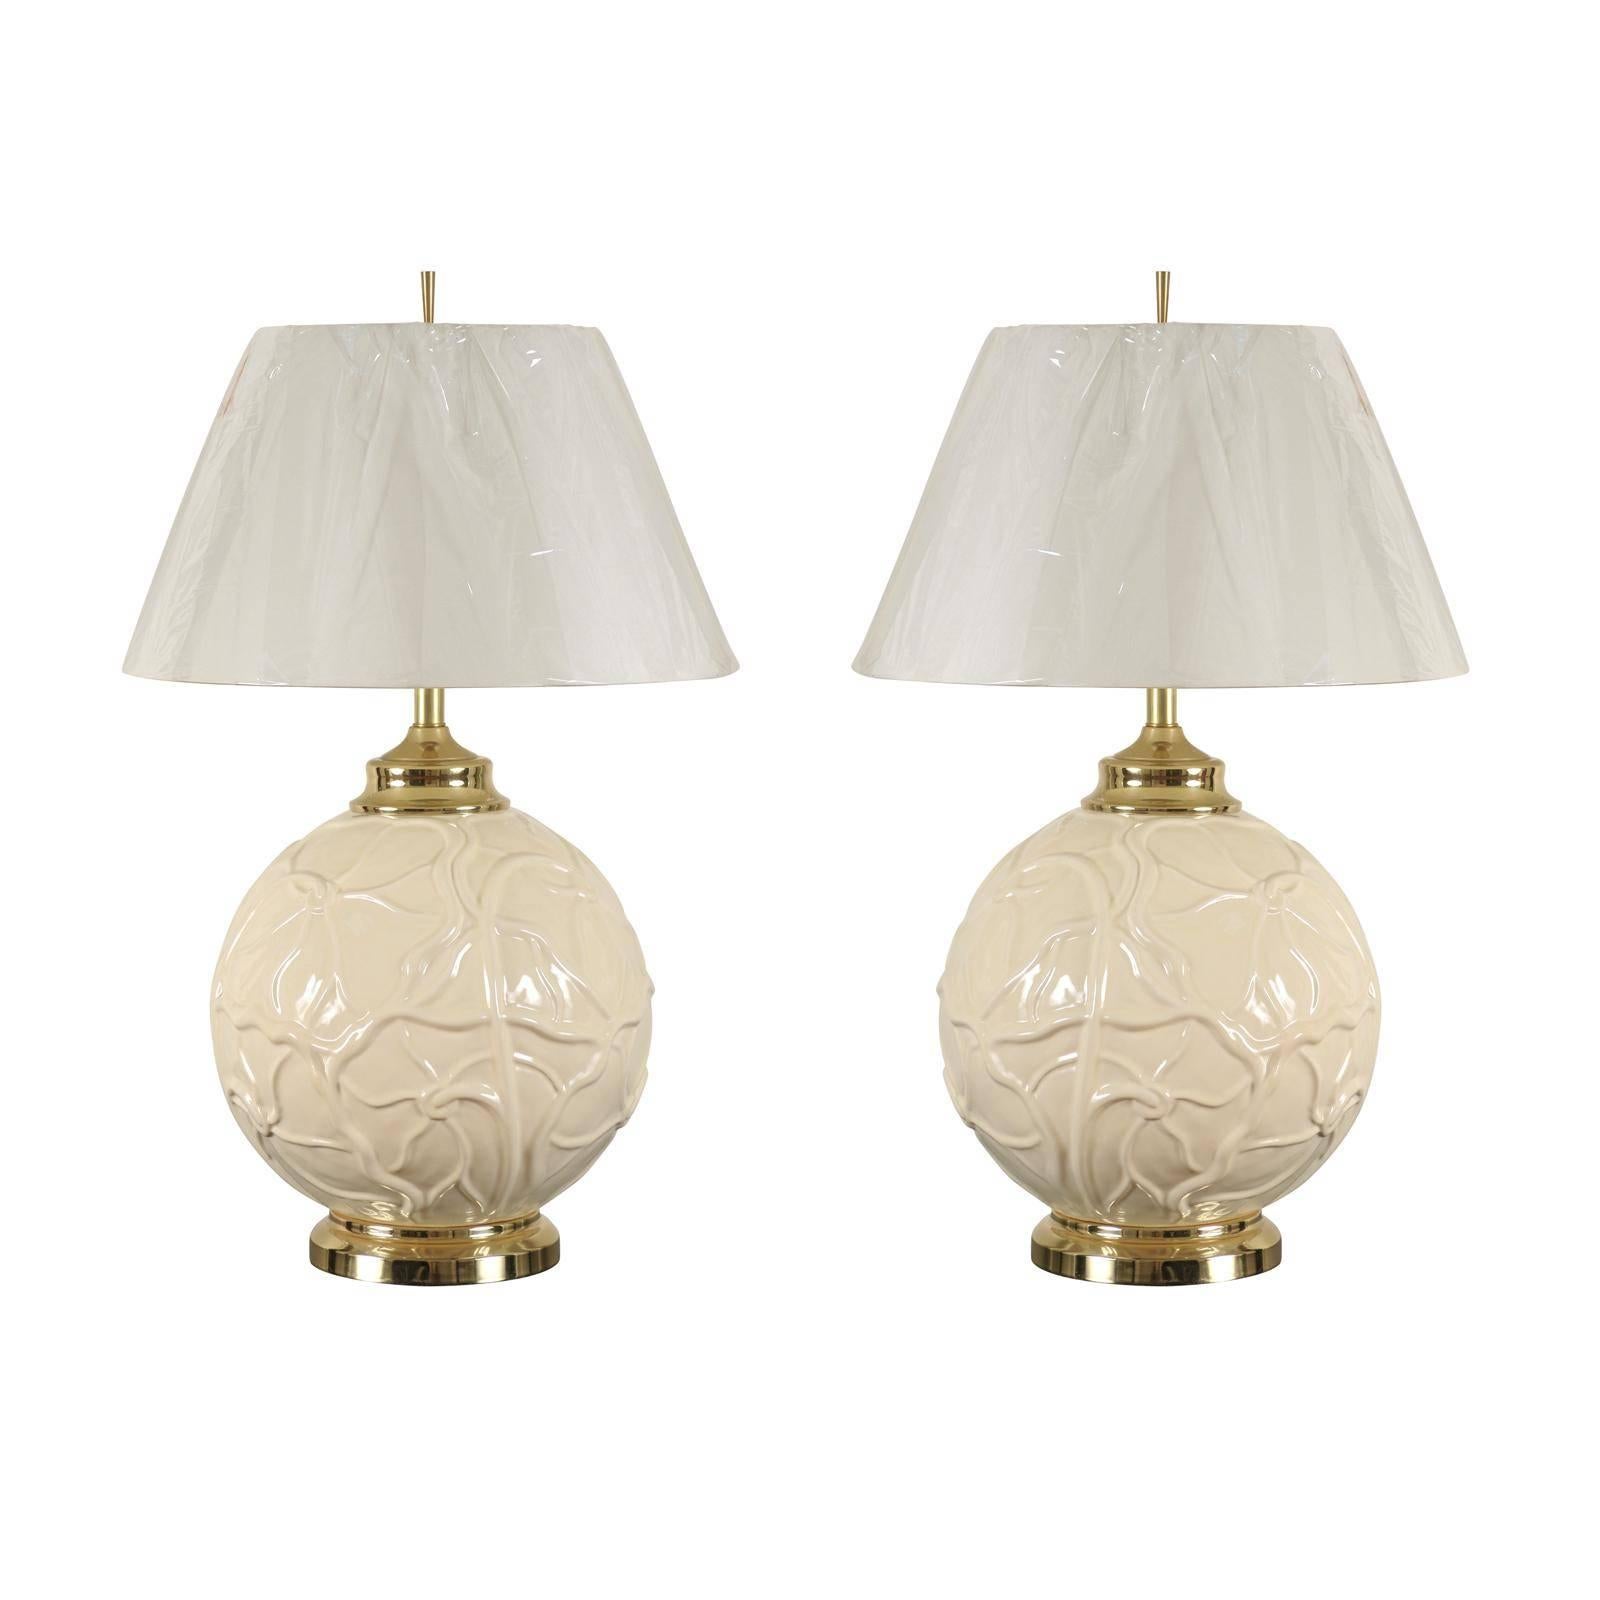 Outstanding Pair of Vintage Ceramic Lily Pad Lamps For Sale